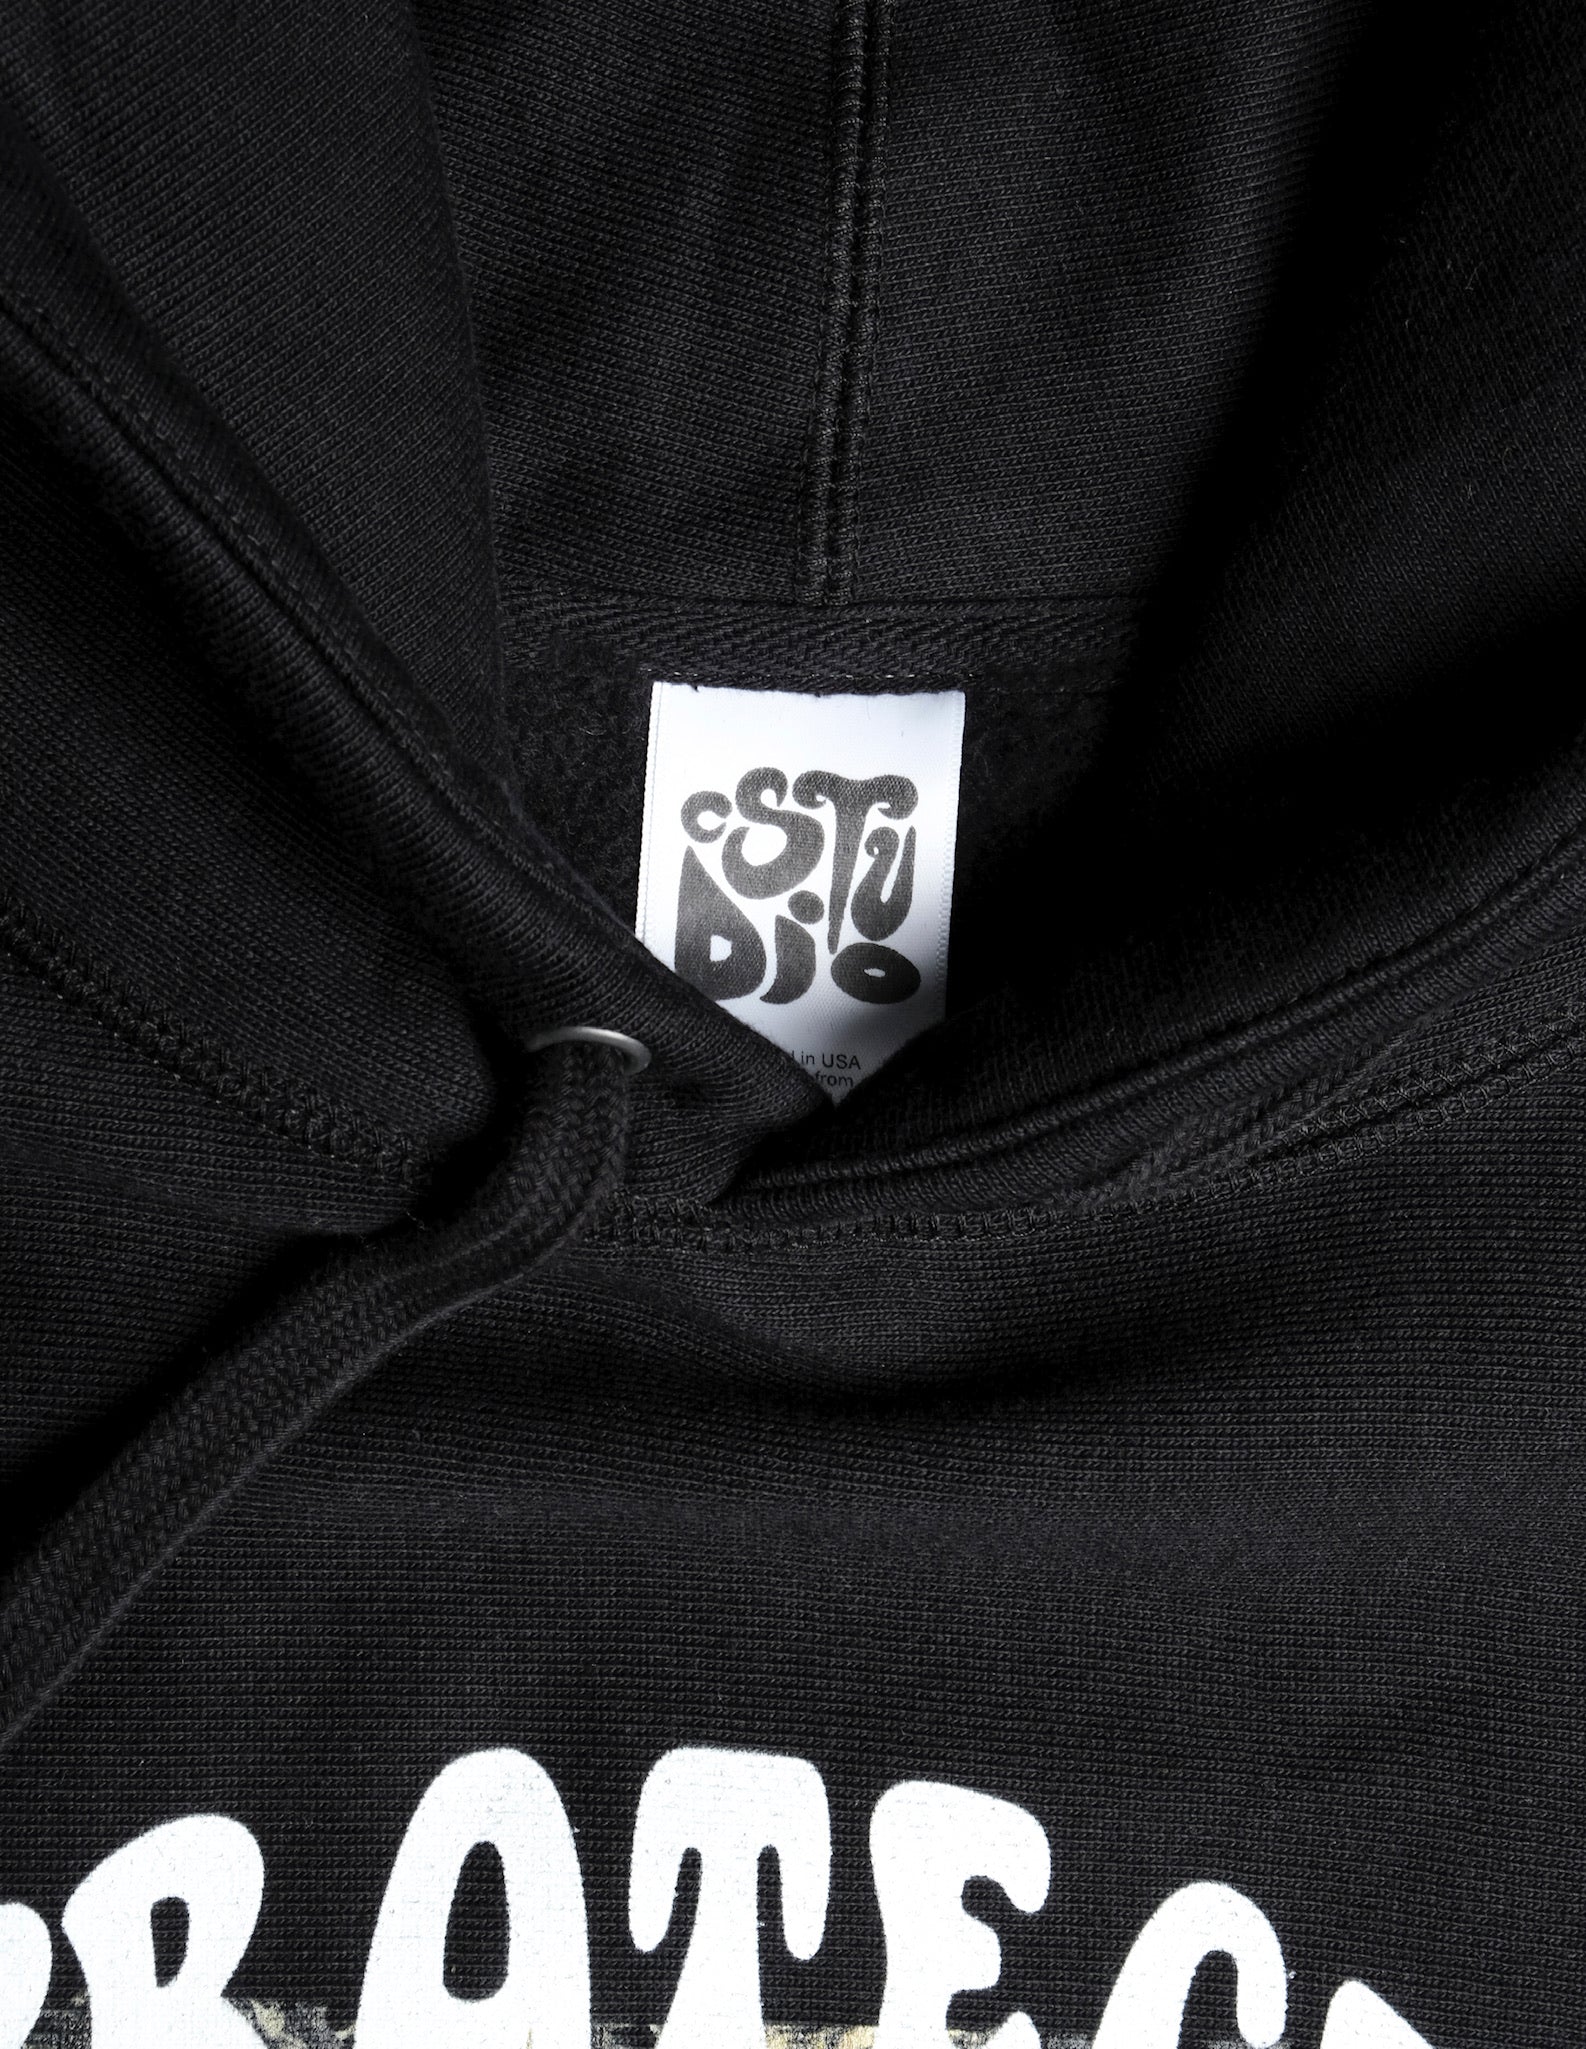 Edition of 20: Protect Black Futures Hoodie — Black